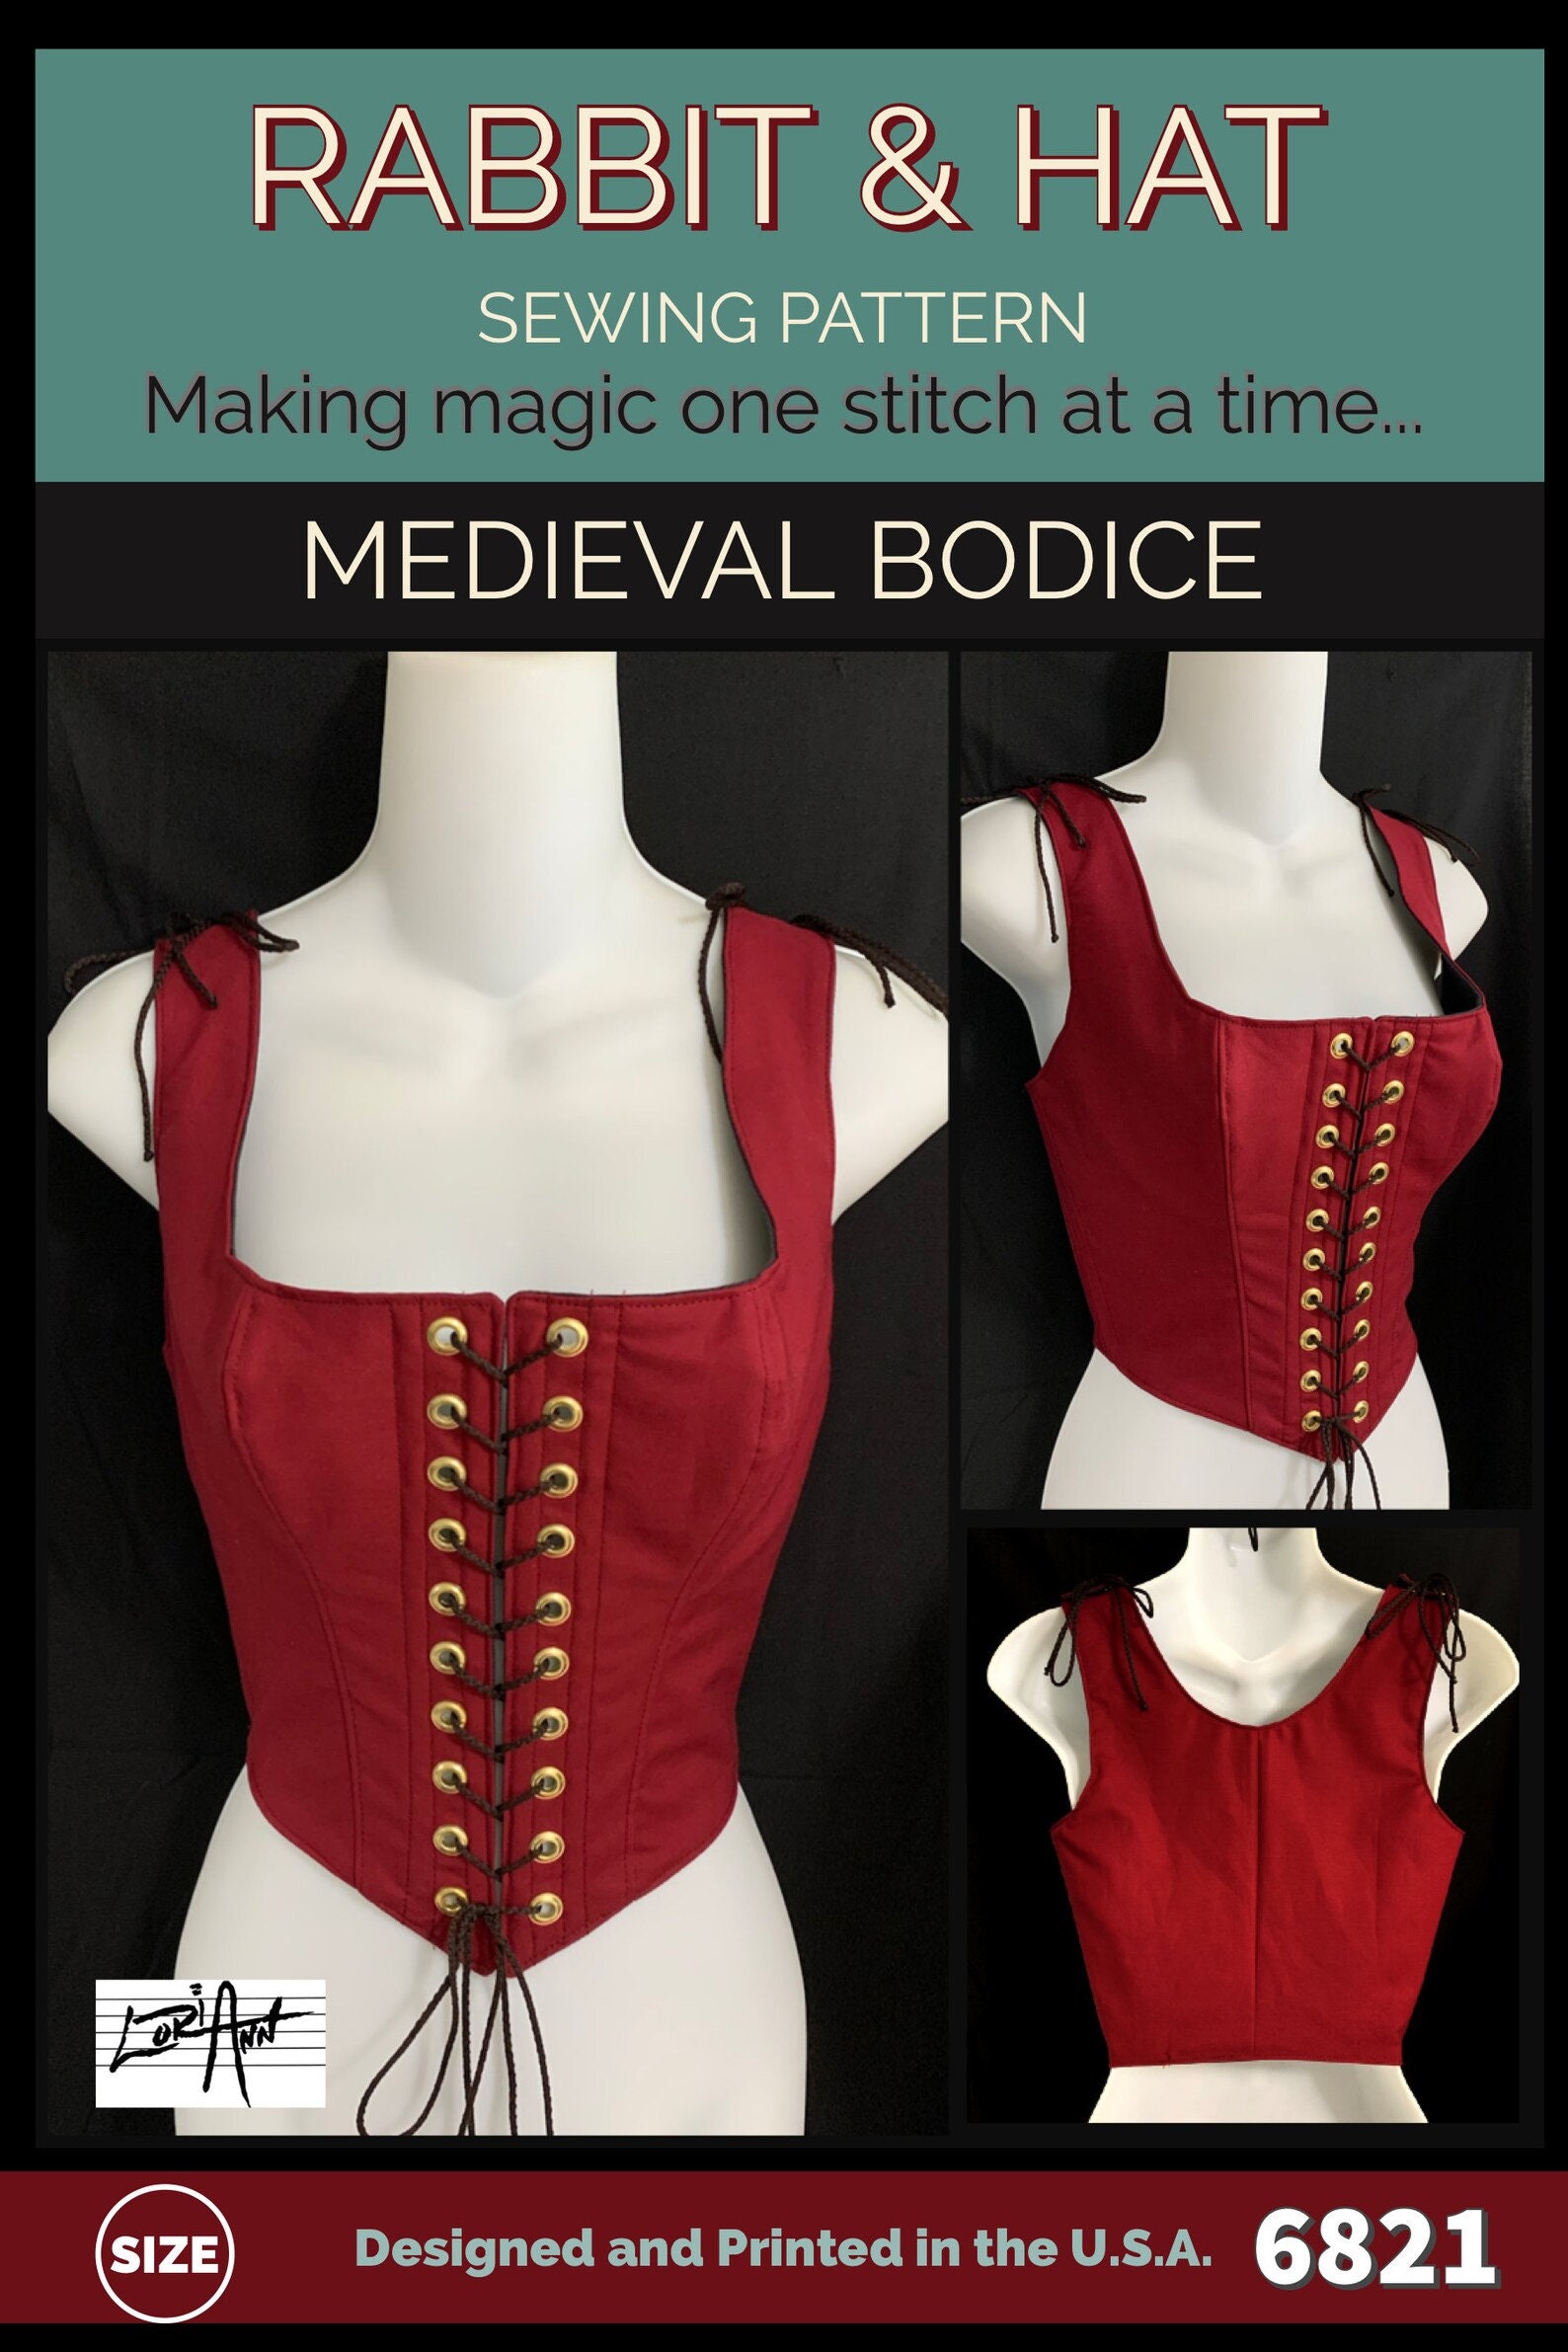 PDF LARGE Medieval Bodice With Front Ties and Adjustable Shoulder 6821 New  Rabbit & Hat Sewing Pattern Instructions Photo Step by Step 